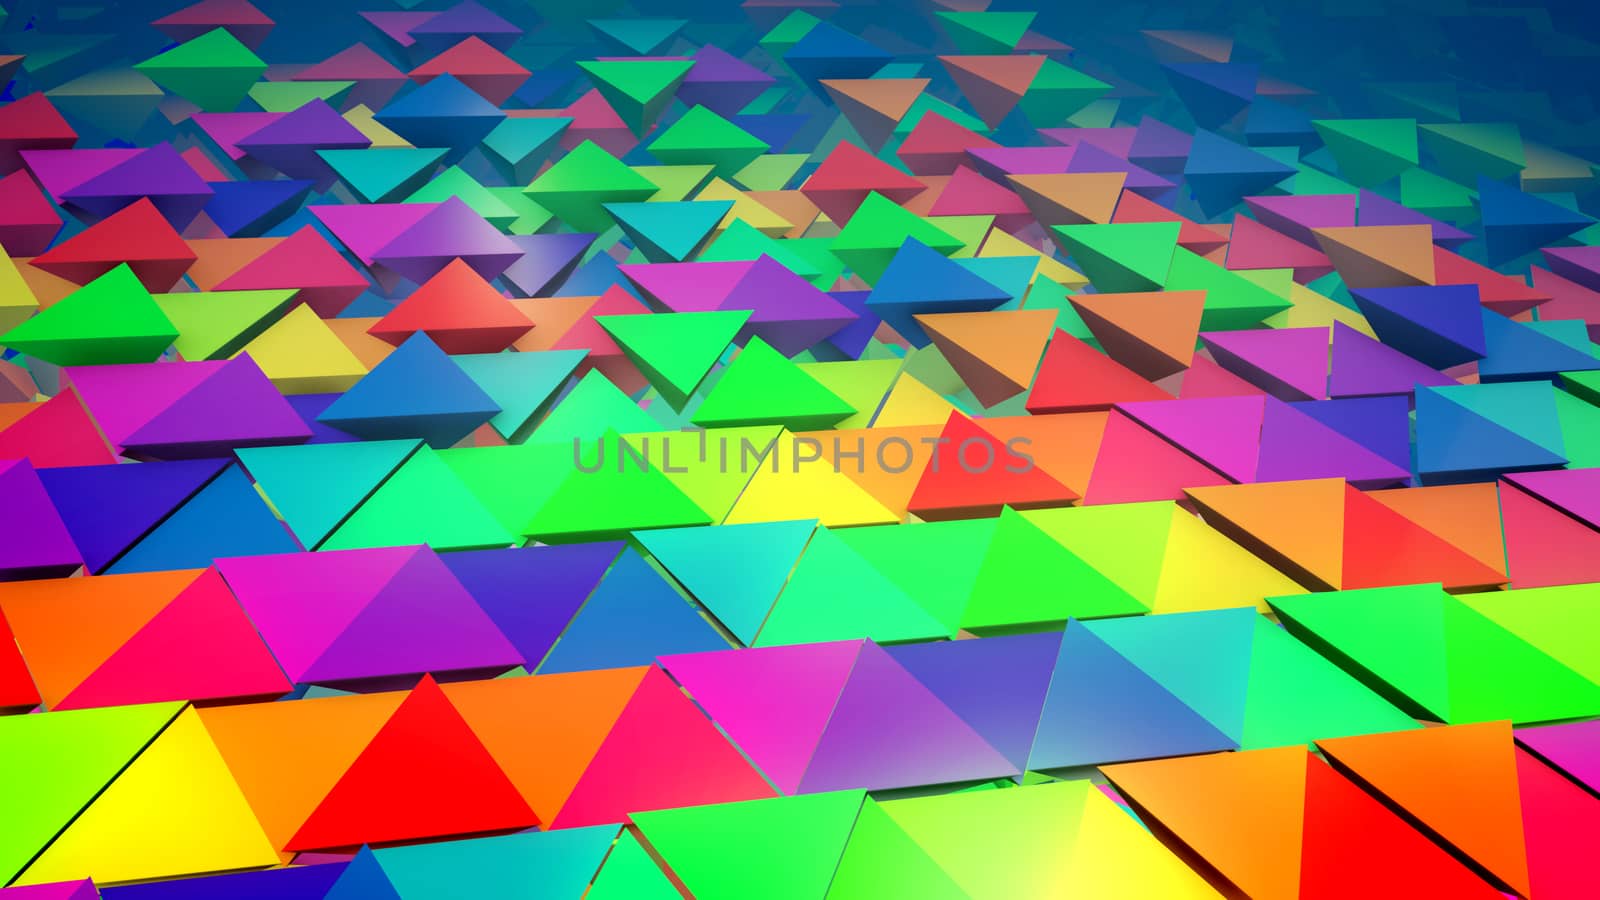 Optimistic 3d illustration of colorful pyramids located horizontally in straight and long lines with some pyramids pushed out with bottoms up. It looks original, childish and exciting.